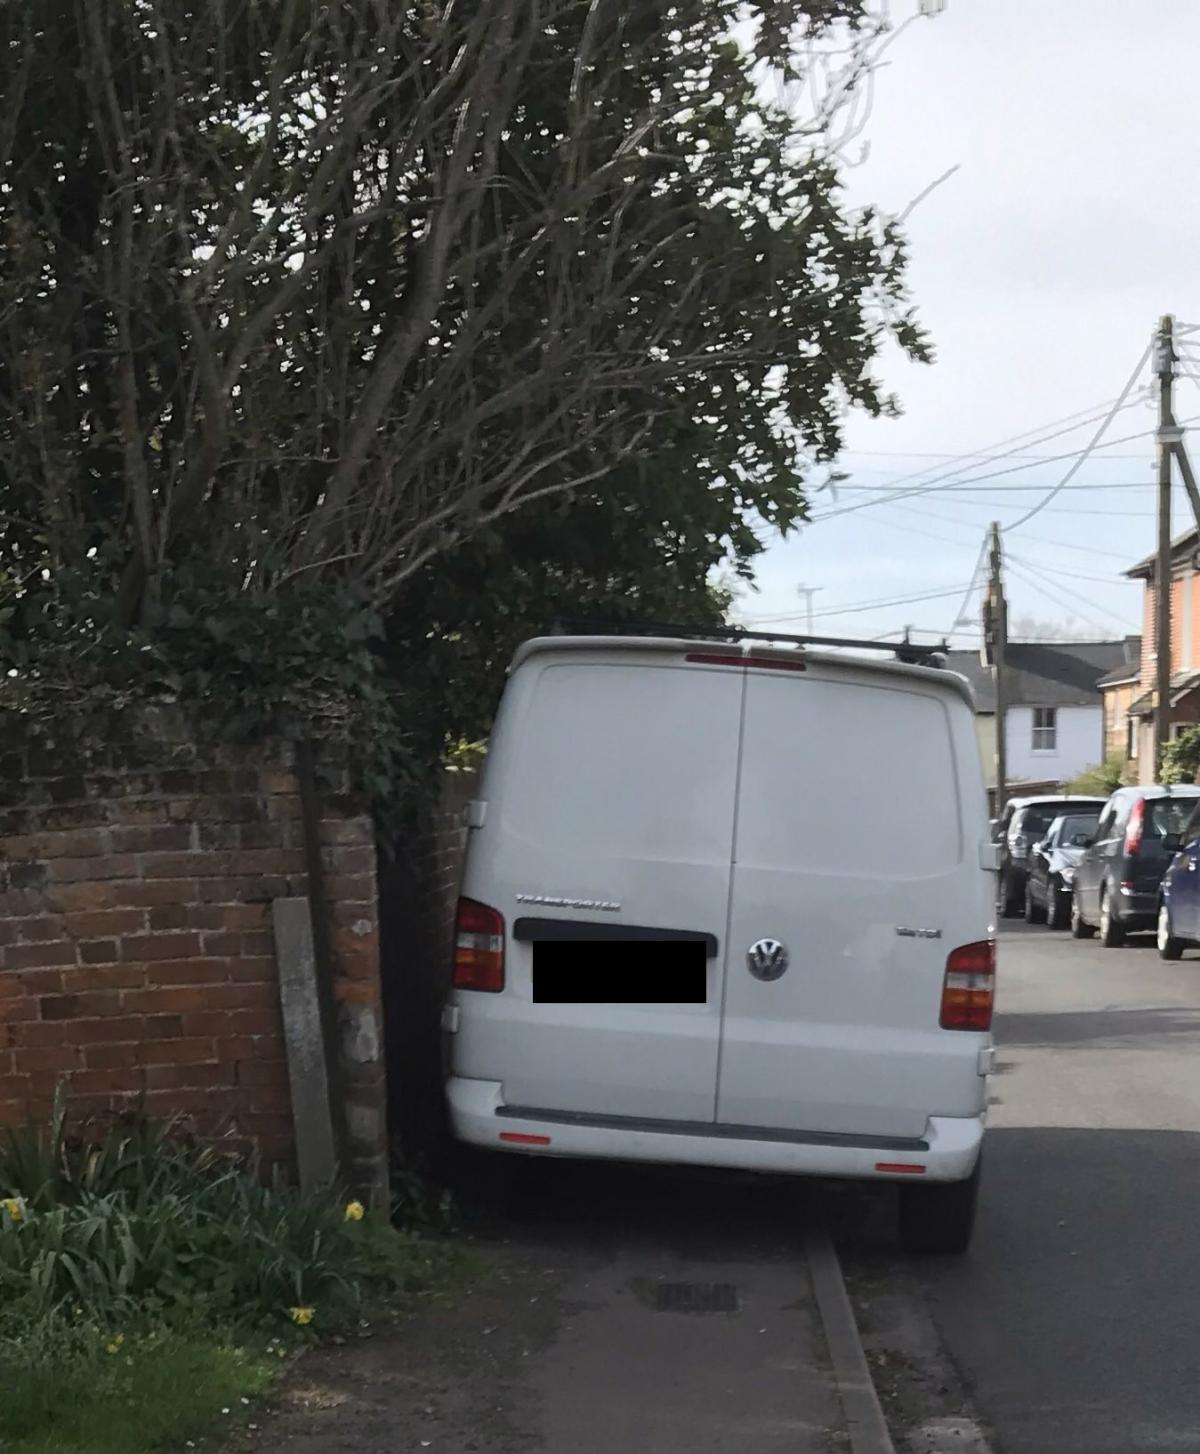 Pavement parking in Colchester